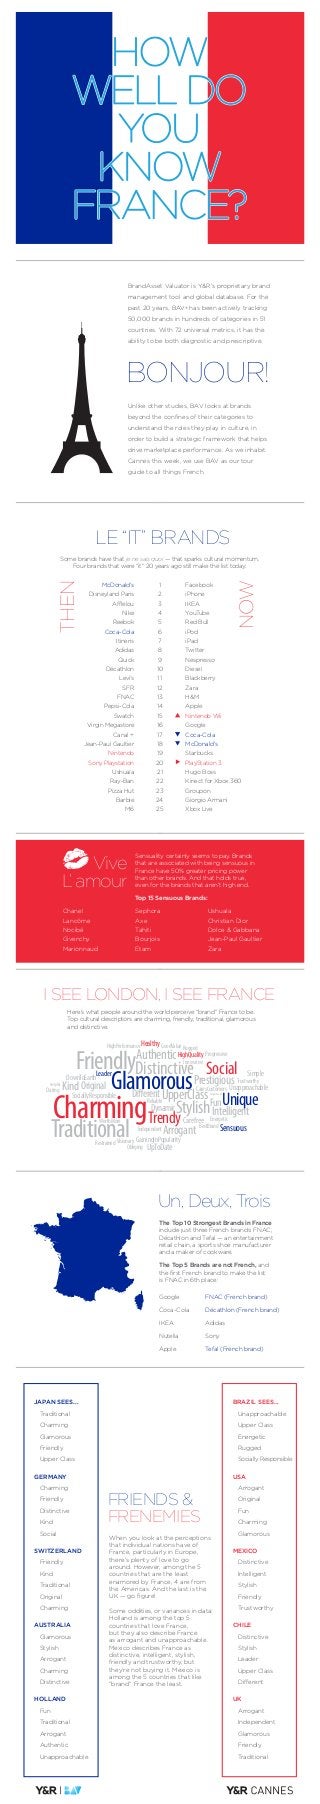 Here’s what people around the world perceive “brand” France to be.
Top cultural descriptors are charming, friendly, traditional, glamorous
and distinctive.
I SEE LONDON, I SEE FRANCE
The Top 10 Strongest Brands in France
include just three French brands: FNAC,
Décathlon and Tefal — an entertainment
retail chain, a sports shoe manufacturer
and a maker of cookware.
The Top 5 Brands are not French, and
the first French brand to make the list
is FNAC in 6th place:
Un, Deux, Trois
Google
Coca-Cola
IKEA
Nutella
Apple
FNAC (French brand)
Décathlon (French brand)
Adidas
Sony
Tefal (French brand)
Charming
Glamorous
Friendly
Traditional
Distinctive Social
UniqueStylish
Trendy
Fun
Carefree
Dynamic
Arrogant BestBrand
Reliable
Restrained
Leader
UpToDateObliging
Energetic
Independent
GainingInPopularityVisionary
WorthMore
Daring
SociallyResponsible
OriginalKindHelpful
DownToEarth
DifferentUpperClass
CaresCustomers
Straightforward
Intelligent
Sensuous
Simple
TrustworthyPrestigiousUnapproachable
Authentic
HighPerformance GoodValueHealthy Rugged
Innovative
ProgressiveHighQuality
FRIENDS &
FRENEMIES
JAPAN SEES...
Traditional
Charming
Glamorous
Friendly
Upper Class
GERMANY
Charming
Friendly
Distinctive
Kind
Social
SWITZERLAND
Friendly
Kind
Traditional
Original
Charming
AUSTRALIA
Glamorous
Stylish
Arrogant
Charming
Distinctive
HOLLAND
Fun
Traditional
Arrogant
Authentic
Unapproachable
BRAZIL SEES...
Unapproachable
Upper Class
Energetic
Rugged
Socially Responsible
USA
Arrogant
Original
Fun
Charming
Glamorous
MEXICO
Distinctive
Intelligent
Stylish
Friendly
Trustworthy
CHILE
Distinctive
Stylish
Leader
Upper Class
Different
UK
Arrogant
Independent
Glamorous
Friendly
Traditional
BONJOUR!
BrandAsset Valuator is Y&R’s proprietary brand
management tool and global database. For the
past 20 years, BAV® has been actively tracking
50,000 brands in hundreds of categories in 51
countries. With 72 universal metrics, it has the
ability to be both diagnostic and prescriptive.
Unlike other studies, BAV looks at brands
beyond the confines of their categories to
understand the roles they play in culture, in
order to build a strategic framework that helps
drive marketplace performance. As we inhabit
Cannes this week, we use BAV as our tour
guide to all things French.
Some brands have that je ne sais quoi — that sparks cultural momentum.
Four brands that were “it” 20 years ago still make the list today:
Facebook
iPhone
IKEA
YouTube
Red Bull
iPod
iPad
Twitter
Nespresso
Diesel
Blackberry
Zara
H&M
Apple
Nintendo Wii
Google
Coca-Cola
McDonald’s
Starbucks
PlayStation 3
Hugo Boss
Kinect for Xbox 360
Groupon
Giorgio Armani
Xbox Live
THEN
NOW
McDonald’s
Disneyland Paris
Afflelou
Nike
Reebok
Coca-Cola
Itineris
Adidas
Quick
Décathlon
Levi’s
SFR
FNAC
Pepsi-Cola
Swatch
Virgin Megastore
Canal +
Jean-Paul Gaultier
Nintendo
Sony Playstation
Ushuaïa
Ray-Ban
Pizza Hut
Barbie
M6
LE “IT” BRANDS
1
2
3
4
5
6
7
8
9
10
1 1
12
13
14
15
16
17
18
19
20
21
22
23
24
25
Vive
L’ amour
Sensuality certainly seems to pay. Brands
that are associated with being sensuous in
France have 50% greater pricing power
than other brands. And that holds true,
even for the brands that aren’t high end.
Chanel
Lancôme
Nocibé
Givenchy
Marionnaud
Sephora
Axe
Tahiti
Bourjois
Etam
Ushuaïa
Christian Dior
Dolce & Gabbana
Jean-Paul Gaultier
Zara
Top 15 Sensuous Brands:
When you look at the perceptions
that individual nations have of
France, particularly in Europe,
there’s plenty of love to go
around. However, among the 5
countries that are the least
enamored by France, 4 are from
the Americas. And the last is the
UK — go figure!
Some oddities, or variances in data:
Holland is among the top 5
countries that love France,
but they also describe France
as arrogant and unapproachable.
Mexico describes France as
distinctive, intelligent, stylish,
friendly and trustworthy, but
they’re not buying it. Mexico is
among the 5 countries that like
“brand” France the least.
 